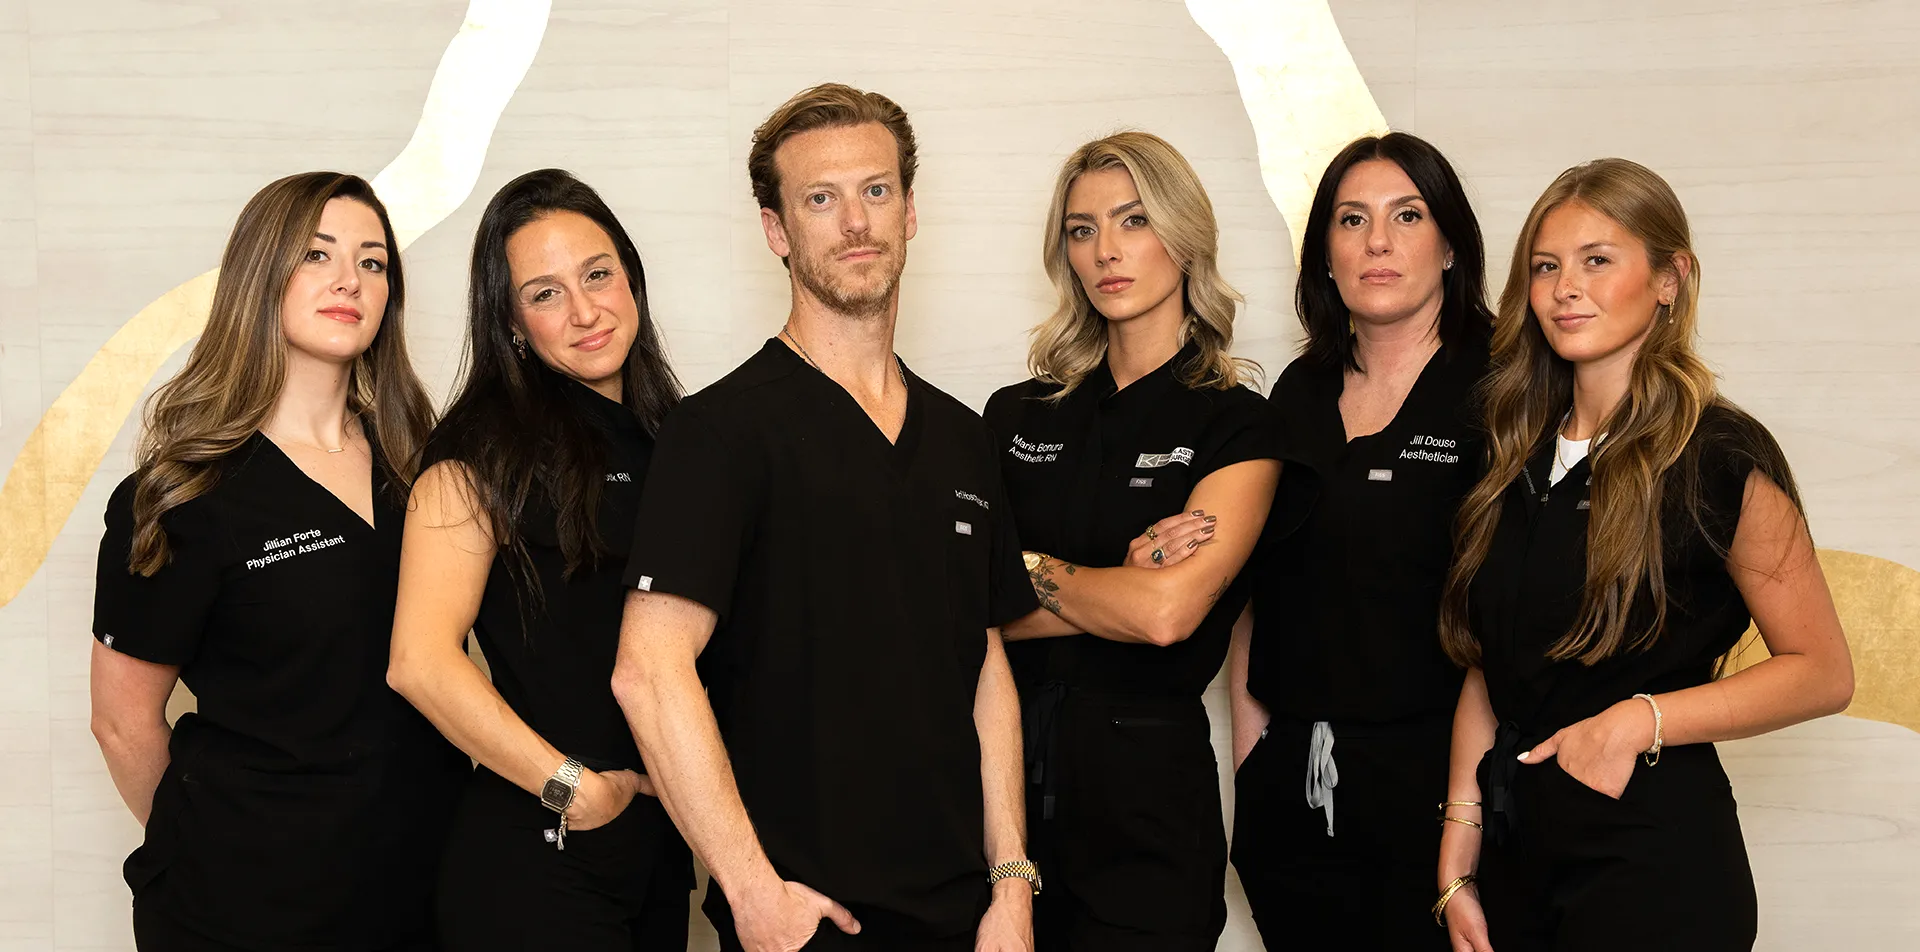 Meet the team at KH Plastic Surgery in New York